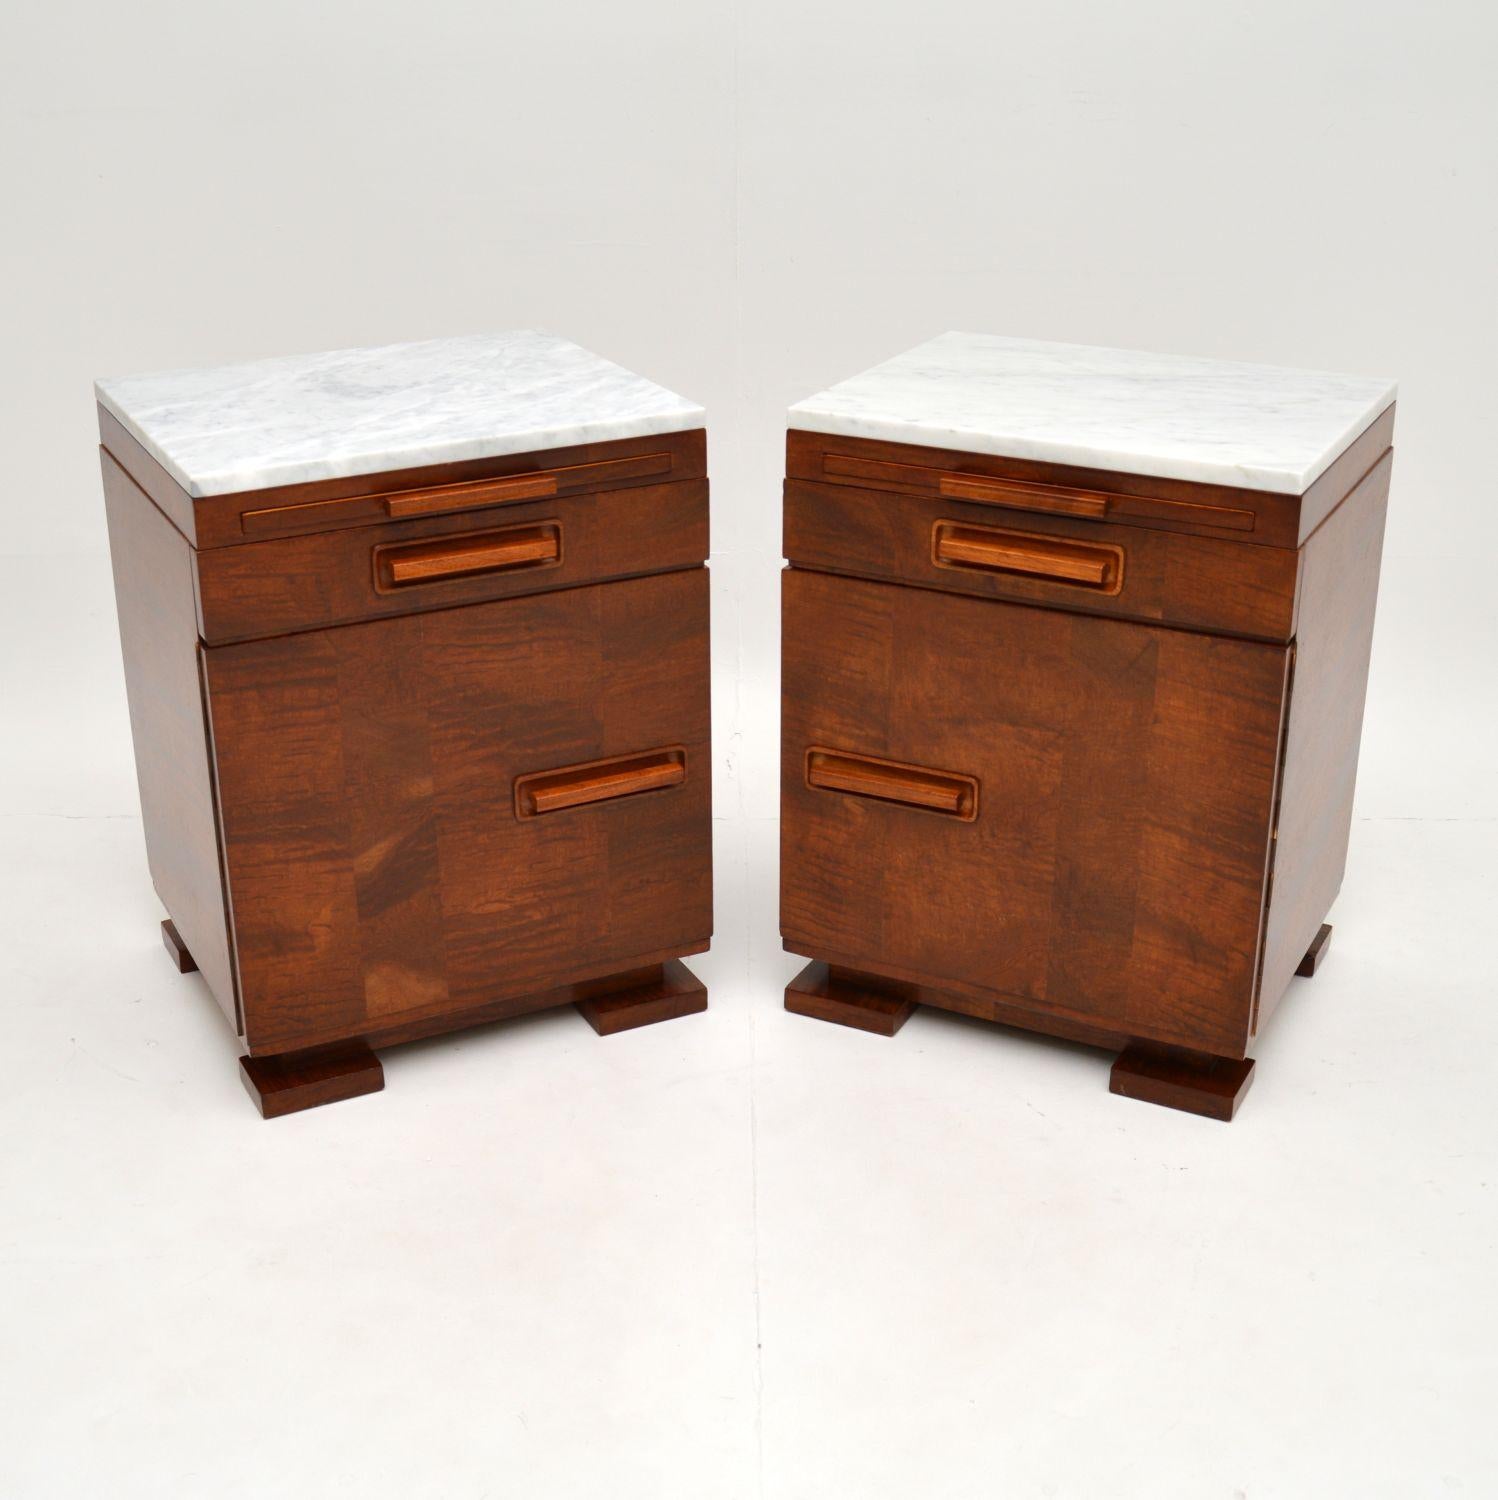 A stunning pair of Art Deco period bedside cabinets in satin birch, with white marble tops. These were made in continental Europe, most likely Sweden, they date from the 1920-1930’s period.

They are outstanding quality, and are polished on the